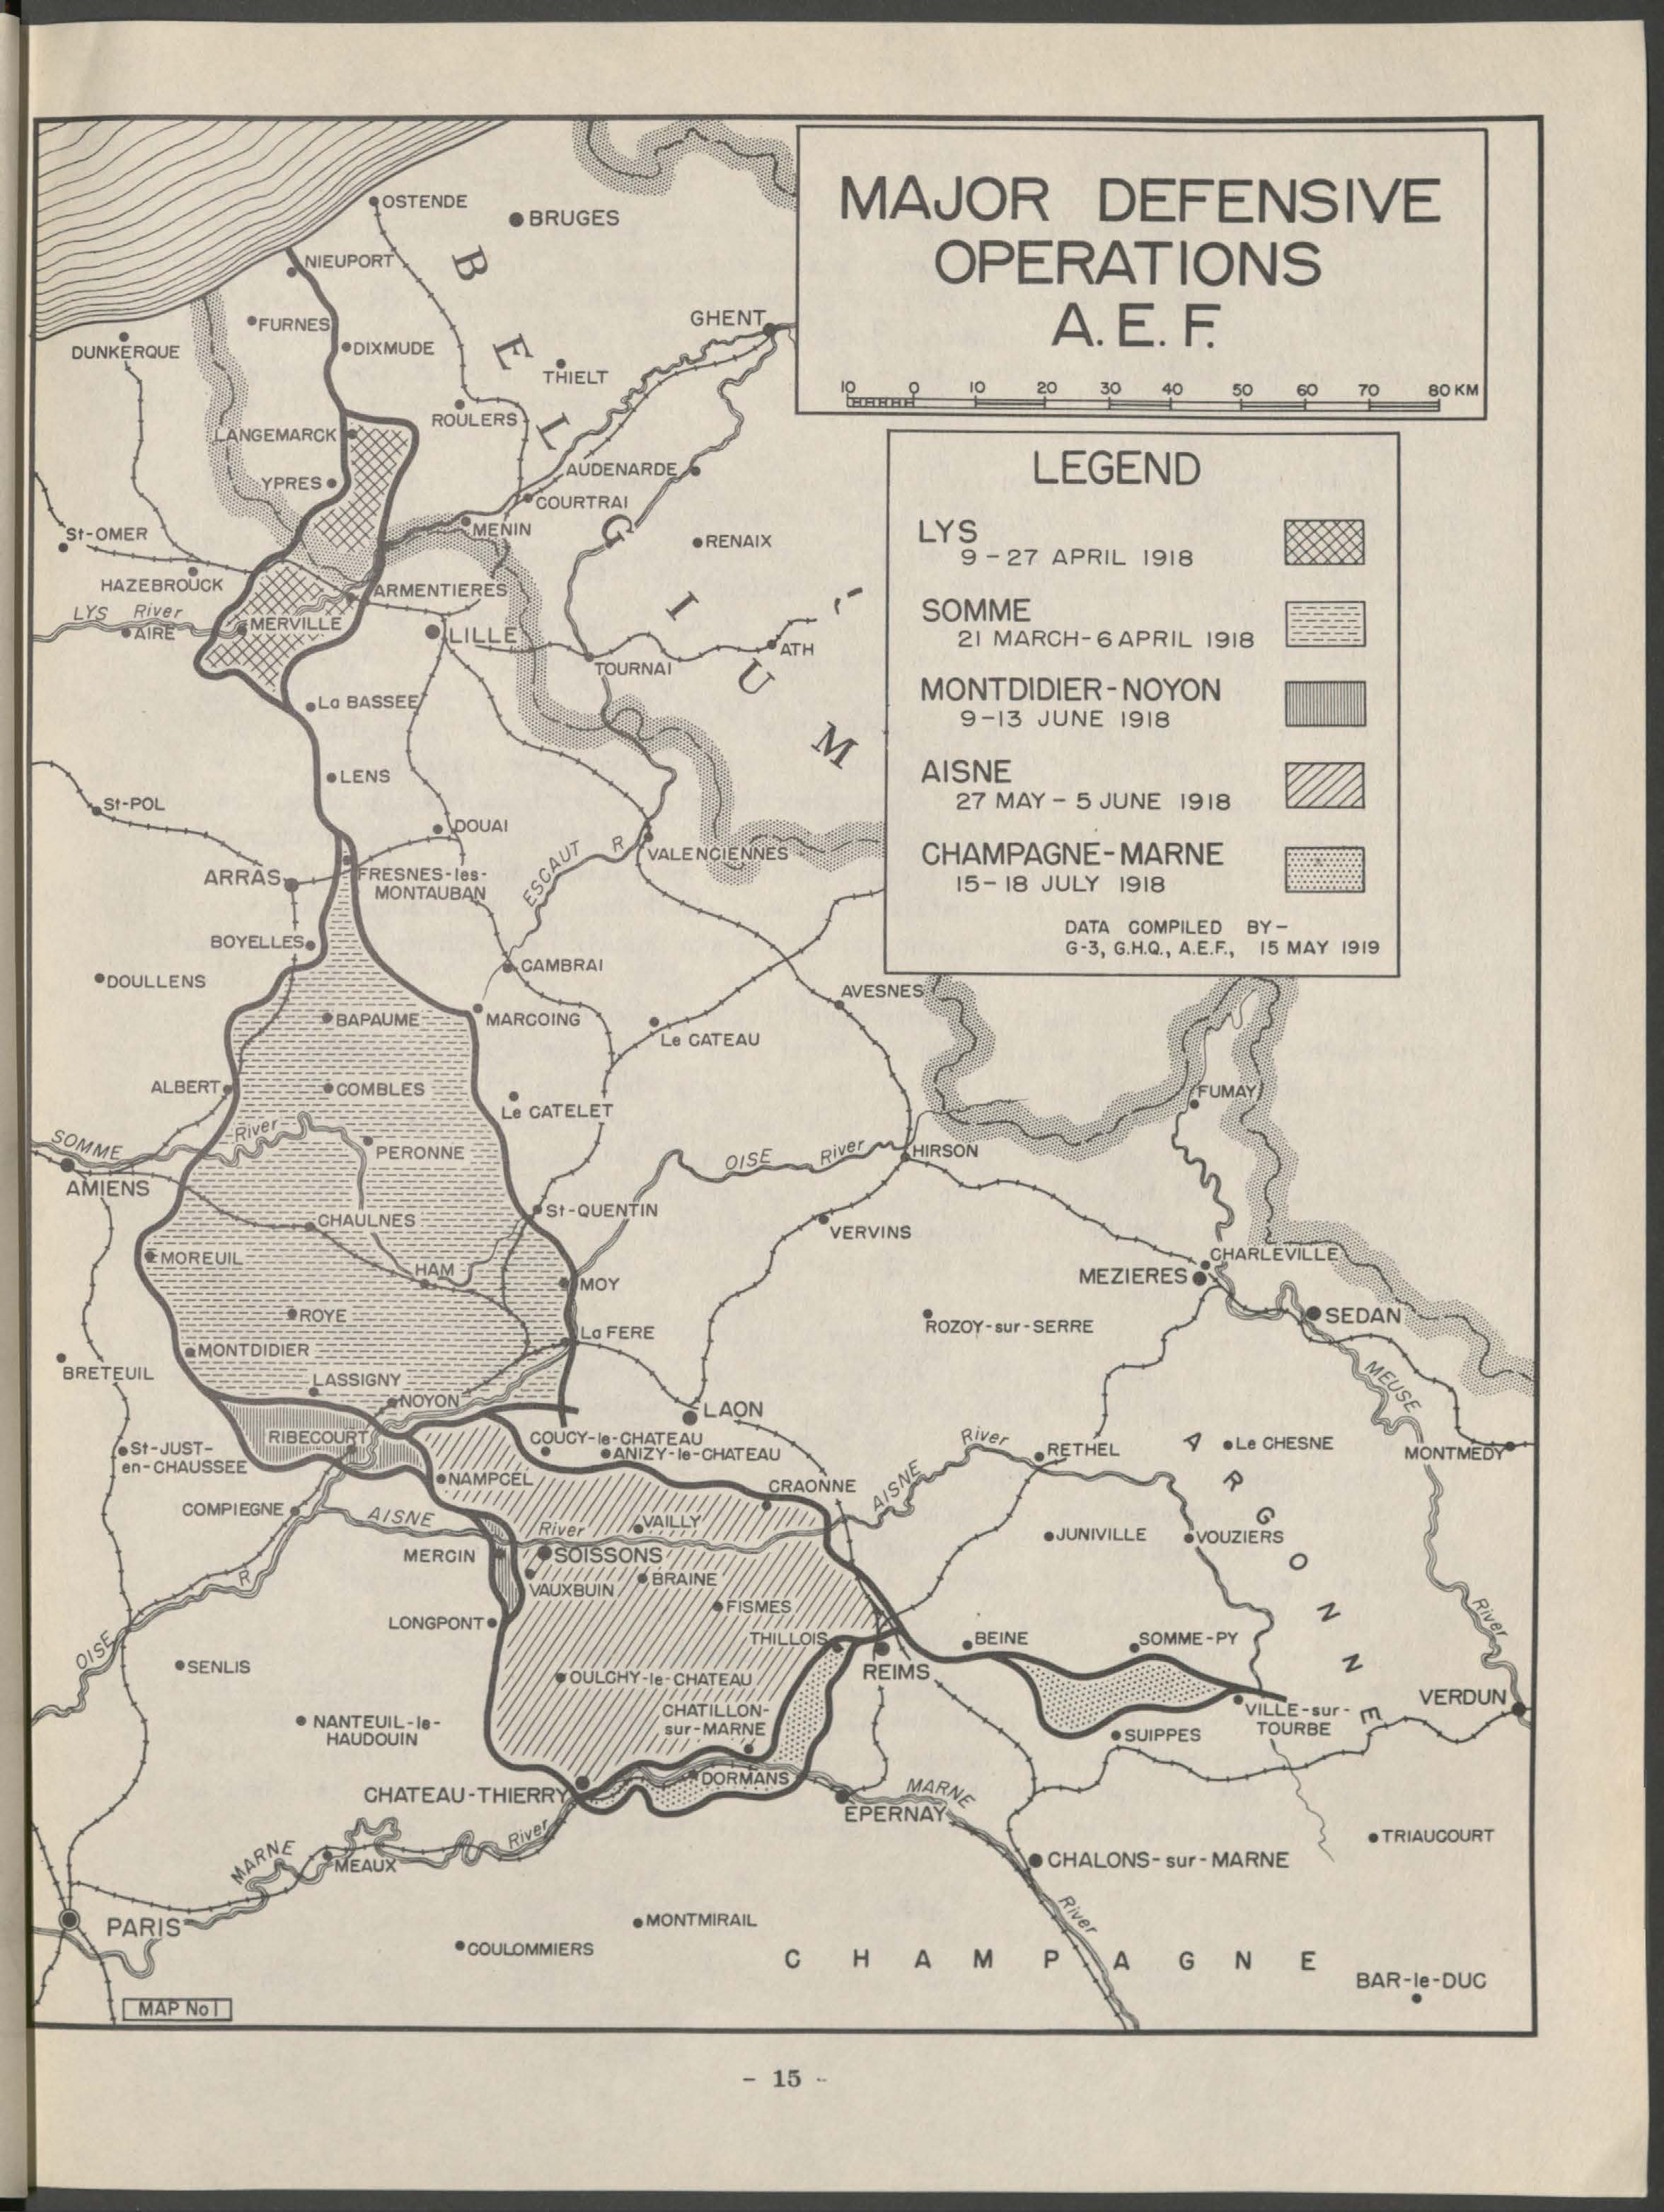 Map of major defensive operations for the American Expeditionary Forces (AEF)